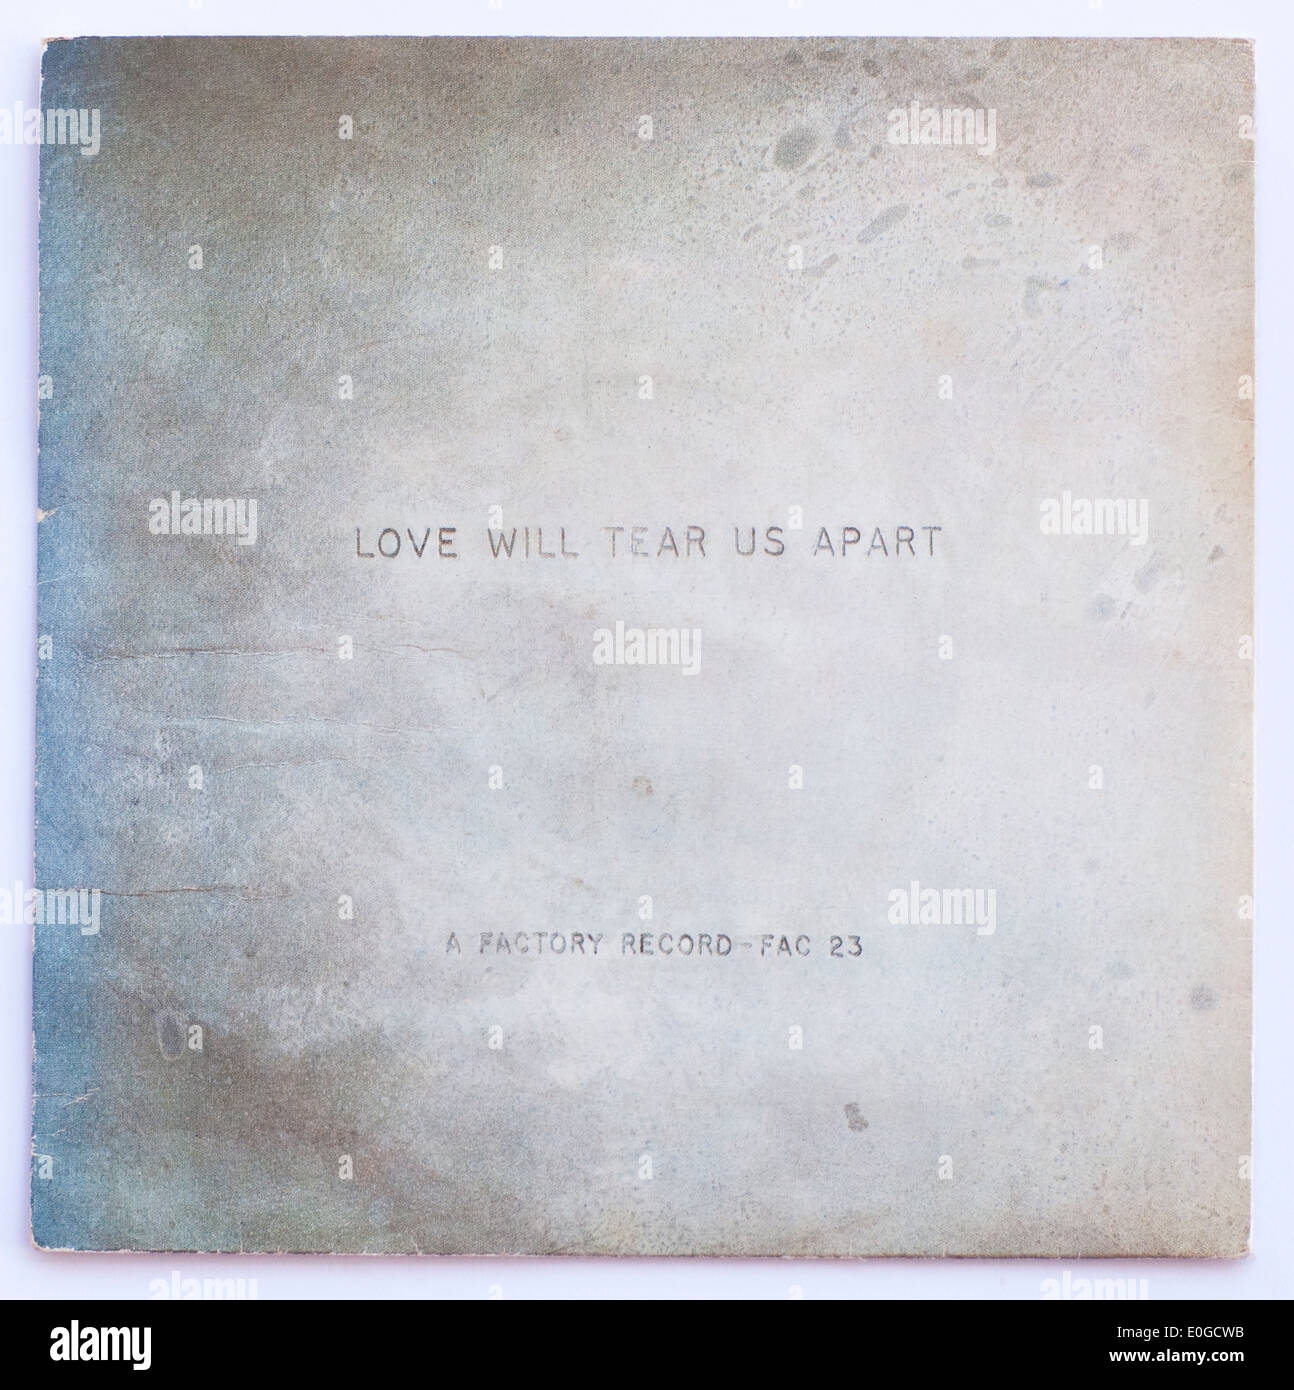 Joy Division - Love Will Tear Us Apart, 1980 7' picture cover single on Factory Records - Editorial use only Stock Photo